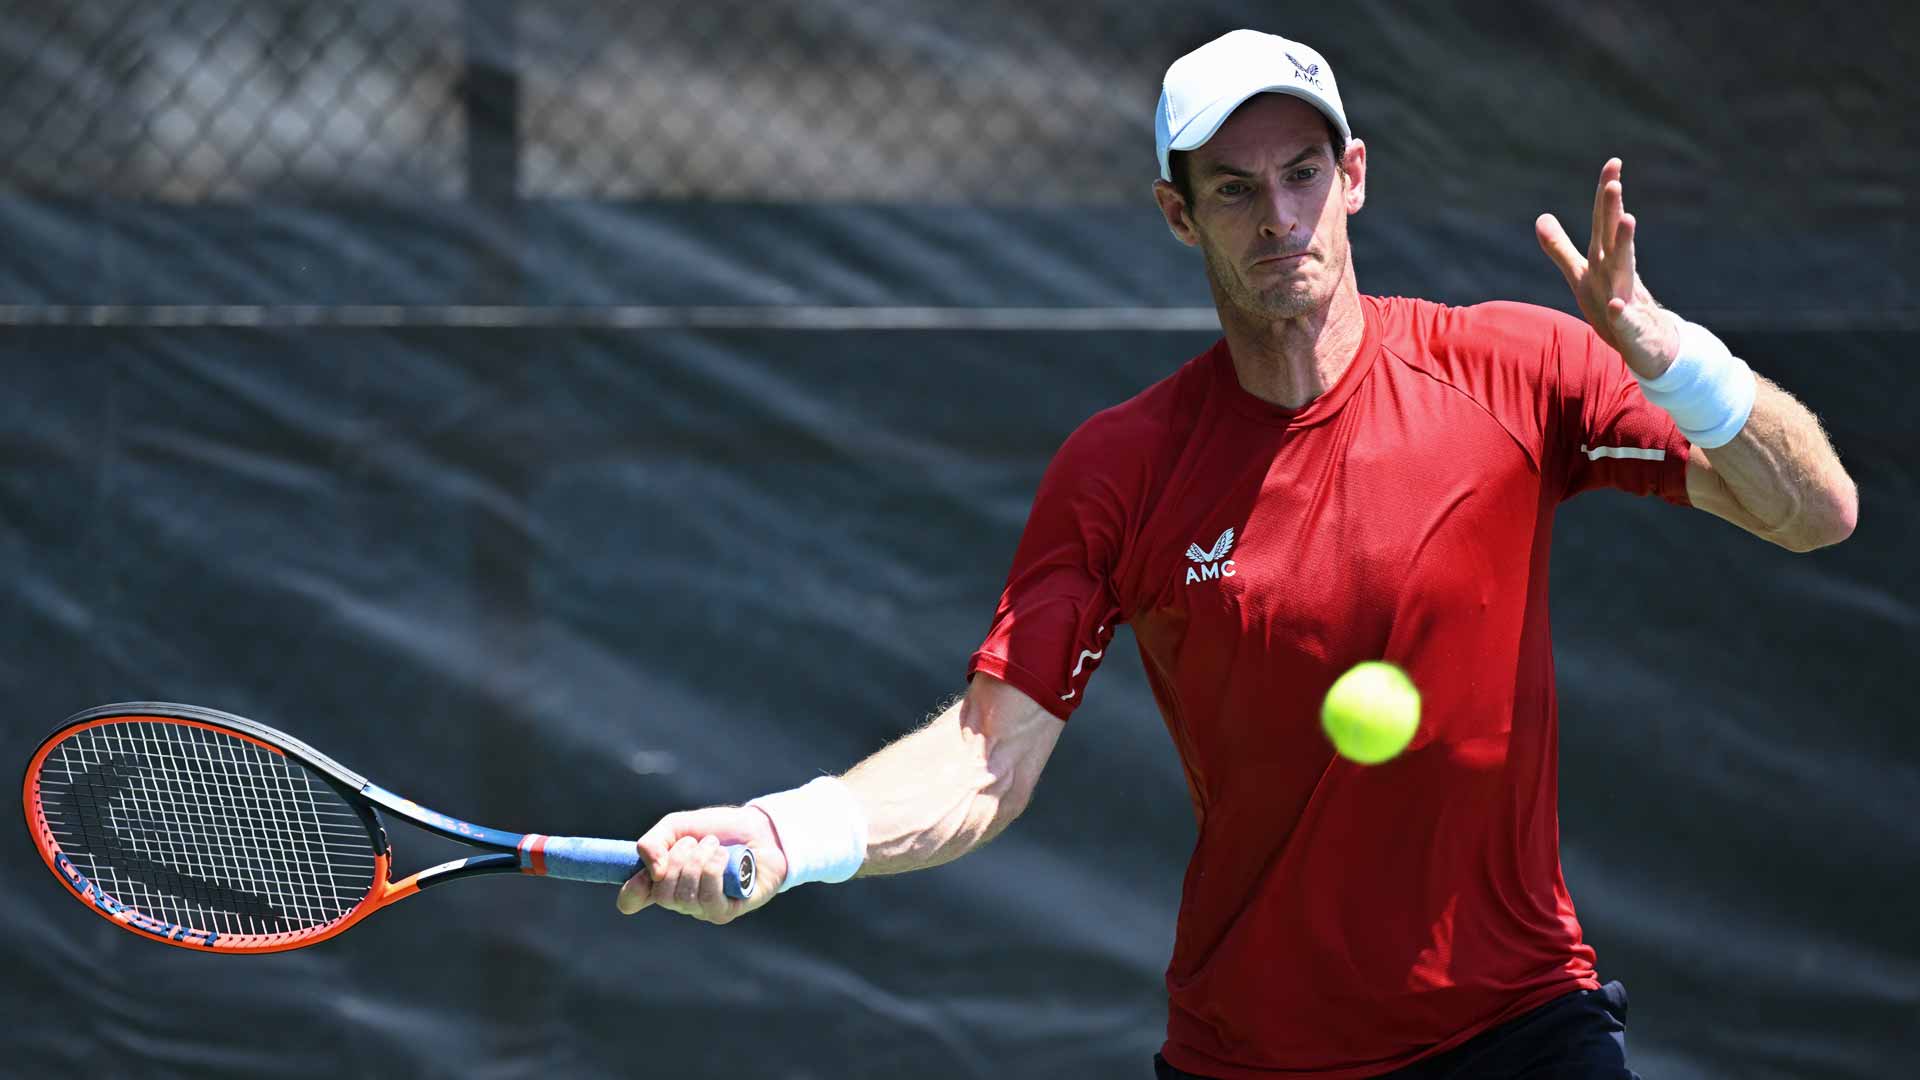 Andy Murray will try to win his first title since 2019 Antwerp this week in Washington.